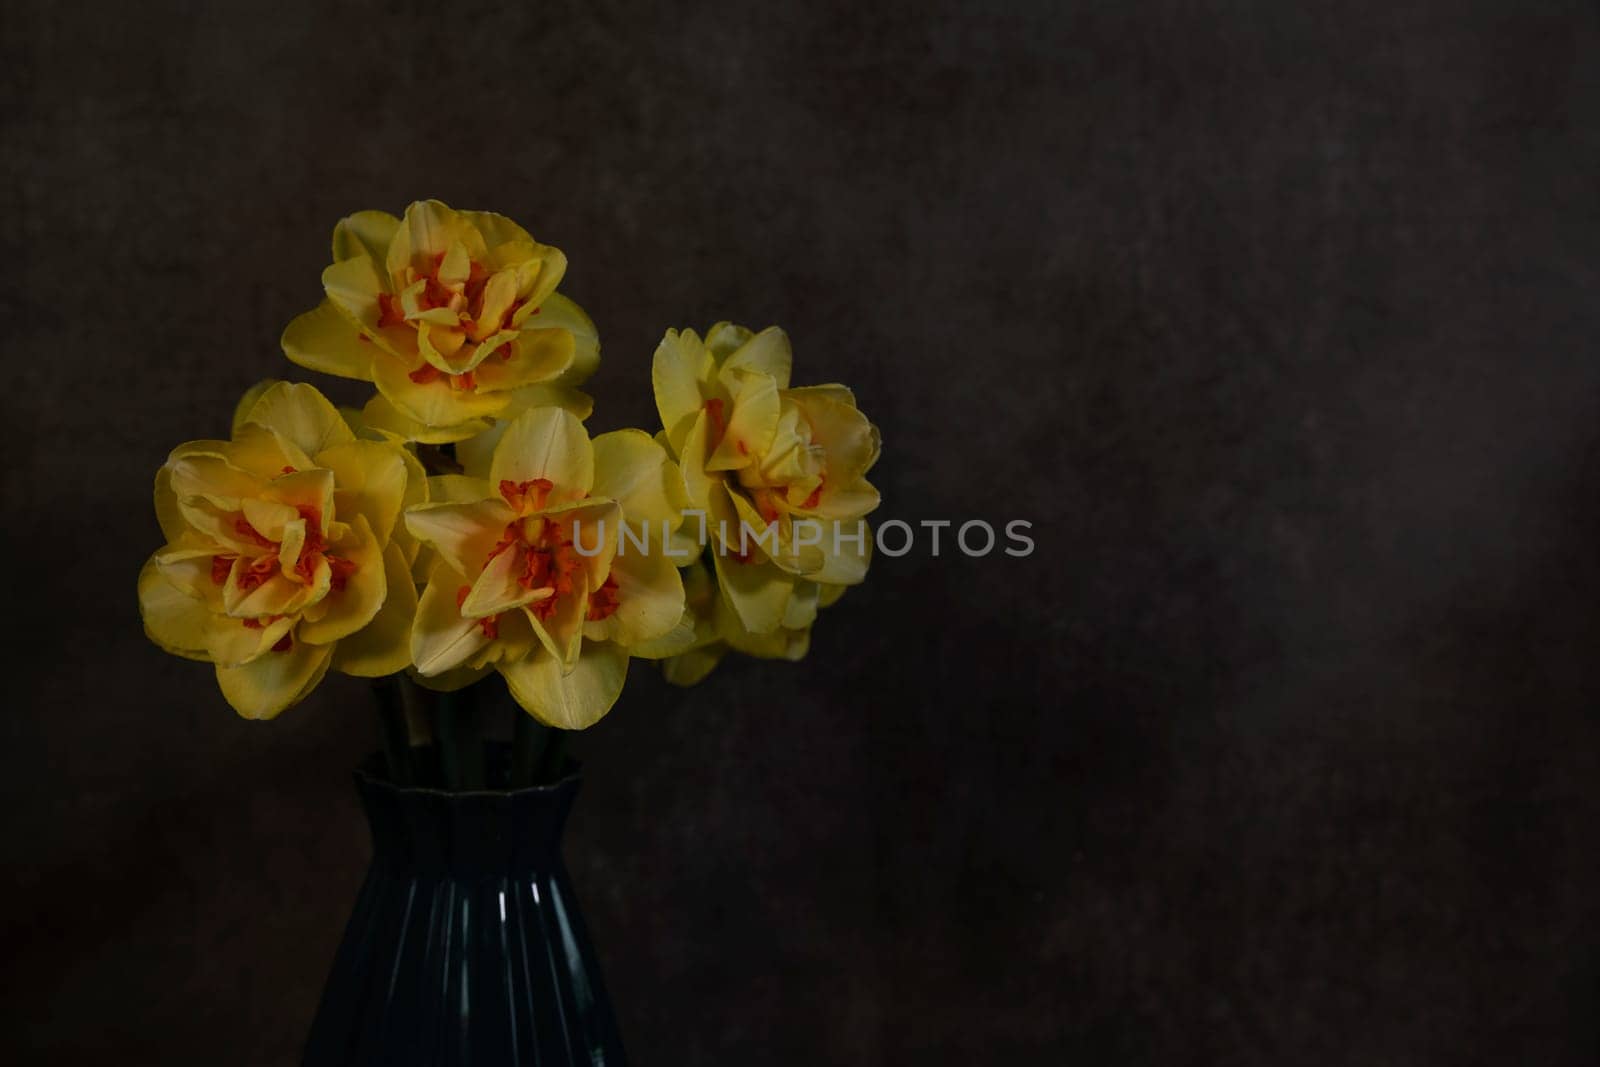 a still life with yellow orange daffodils on a dark background by compuinfoto